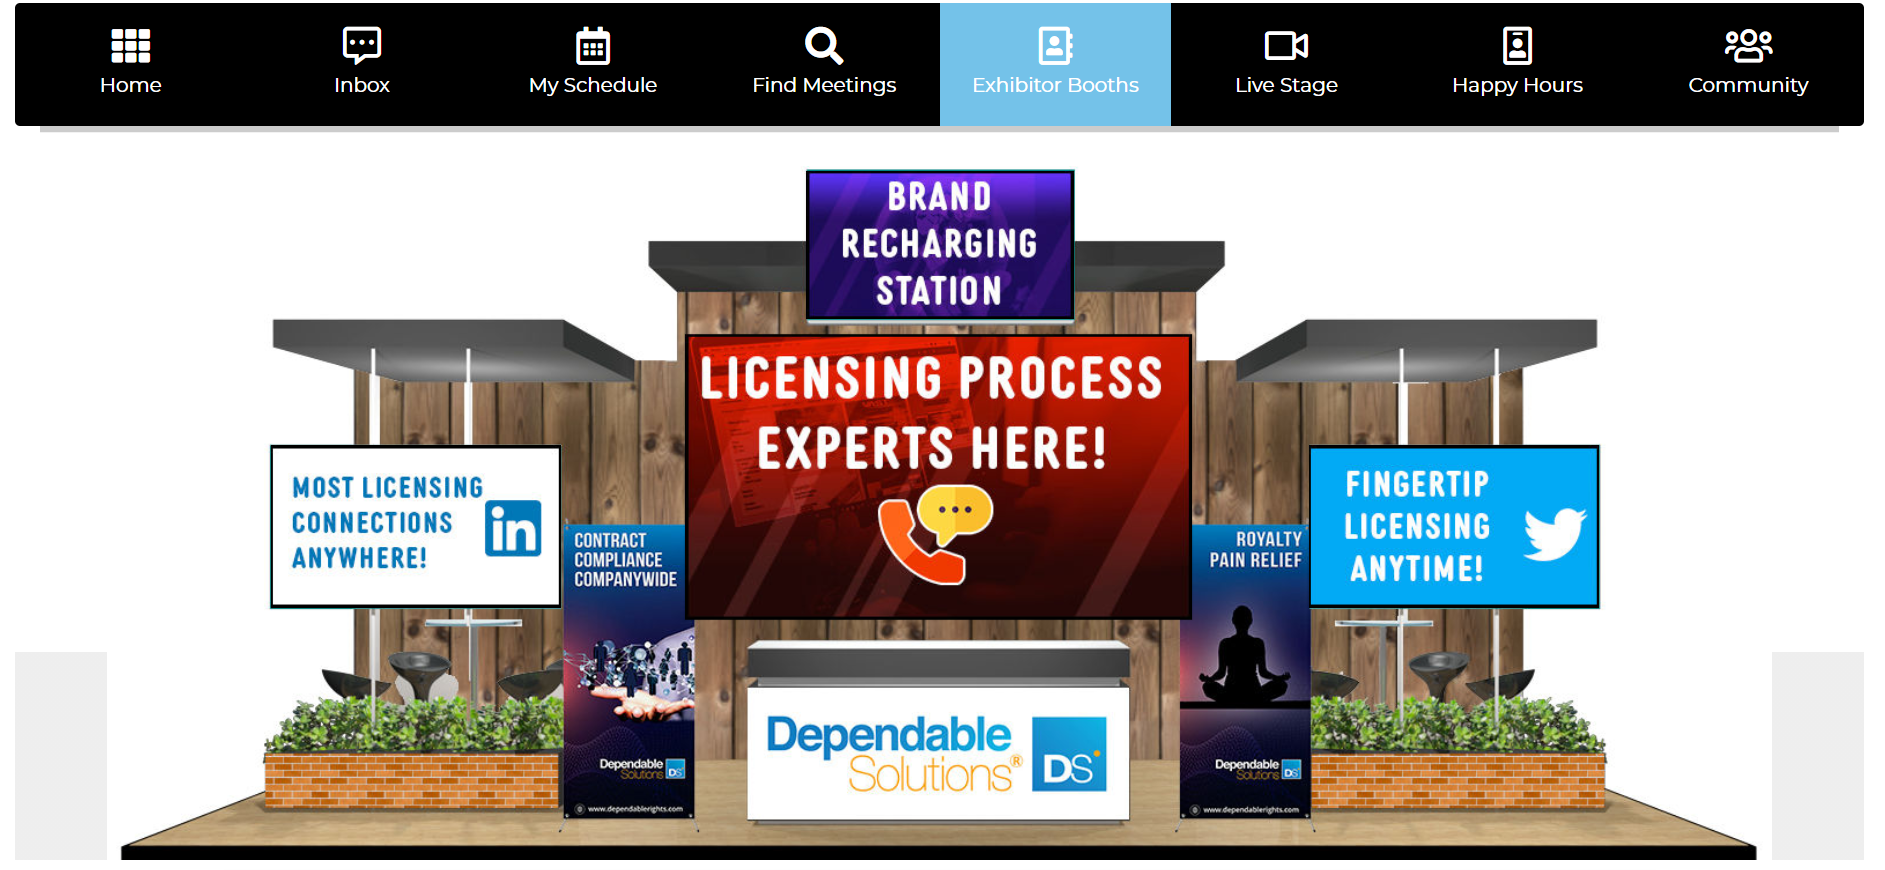 Dependable Solutions, Inc. joins industry’s biggest digital gathering: Festival of Licensing!